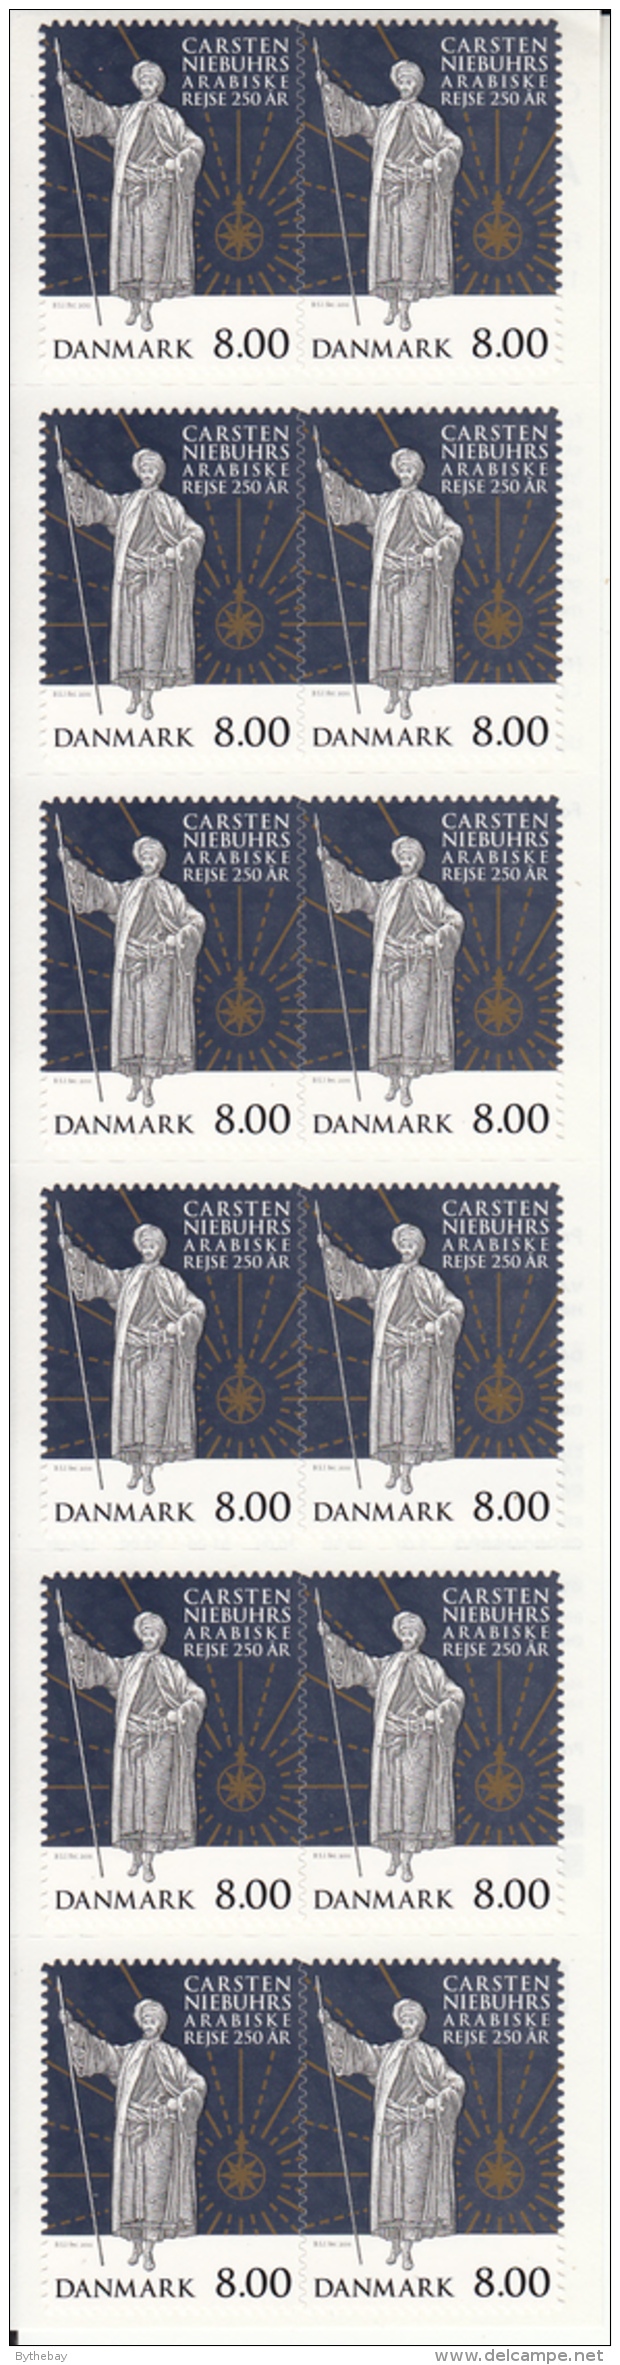 Denmark MNH Scott #1538a Booklet Of 12 8k Carsten Niebuhrs' Arabian Expedition 250th Anniversary - Nuovi